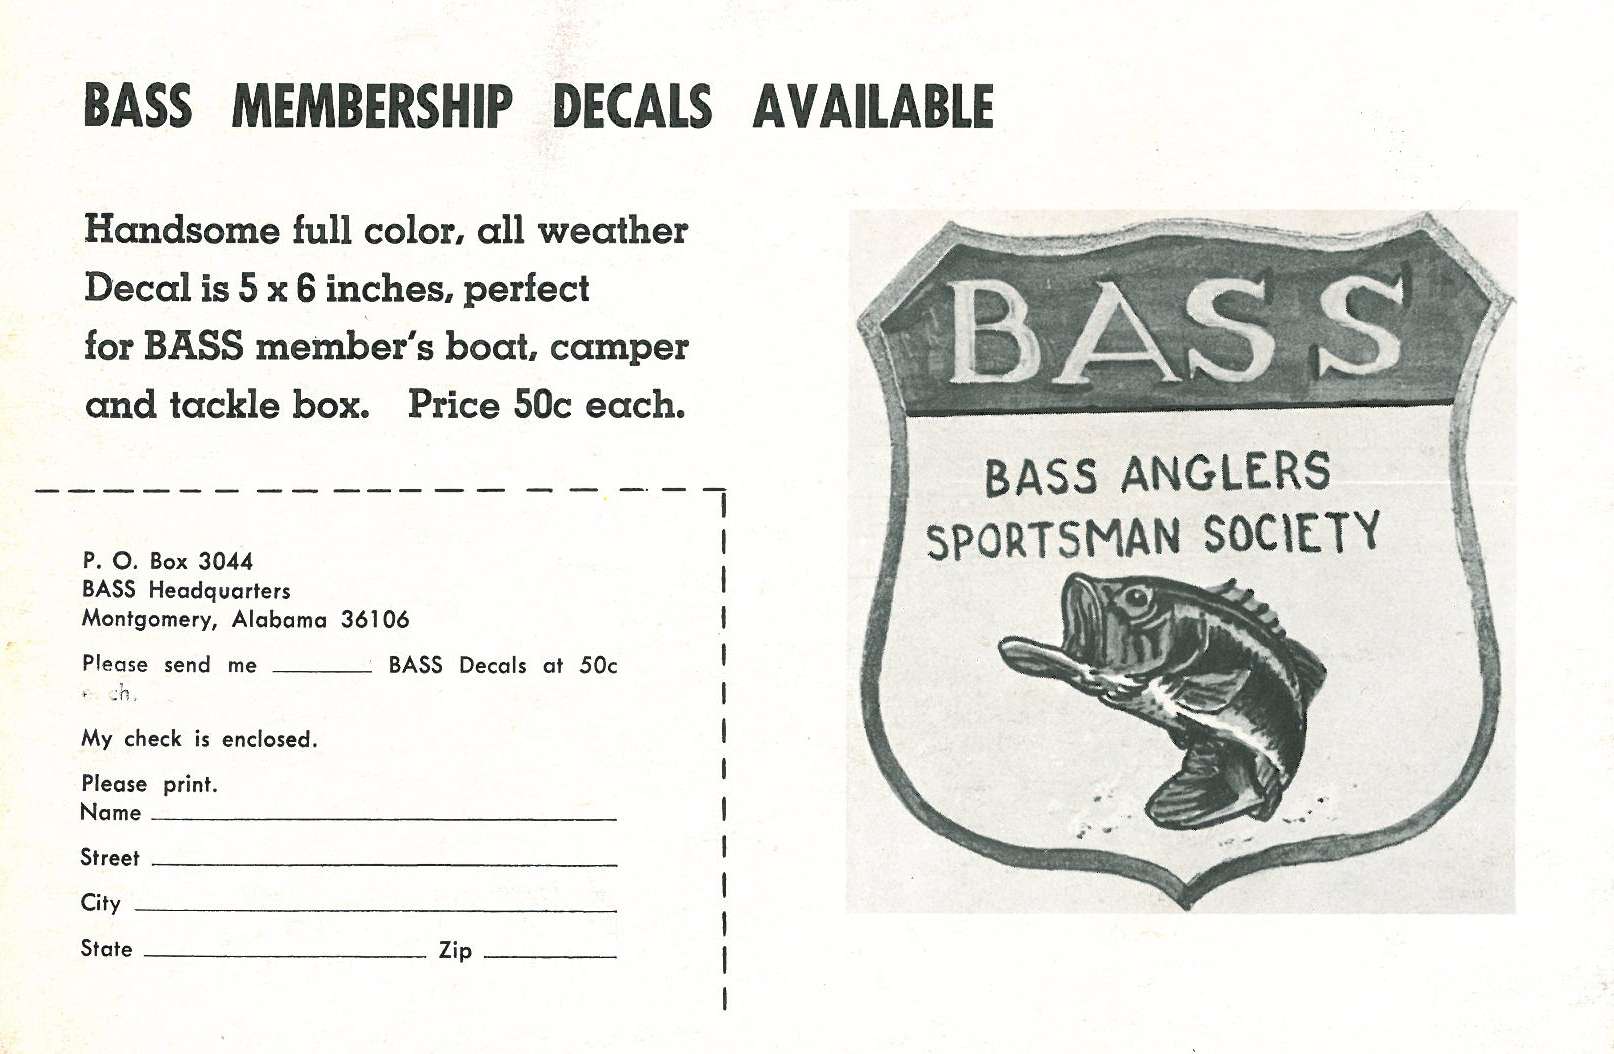 In 1968, anglers could send in 50 cents and receive a B.A.S.S. decal for their boat, camper or tacklebox. Early B.A.S.S. business was based in a Montgomery, Ala., shack. The company moved to offices as it grew, and B.A.S.S. stayed in Montgomery for a total of 37 years.